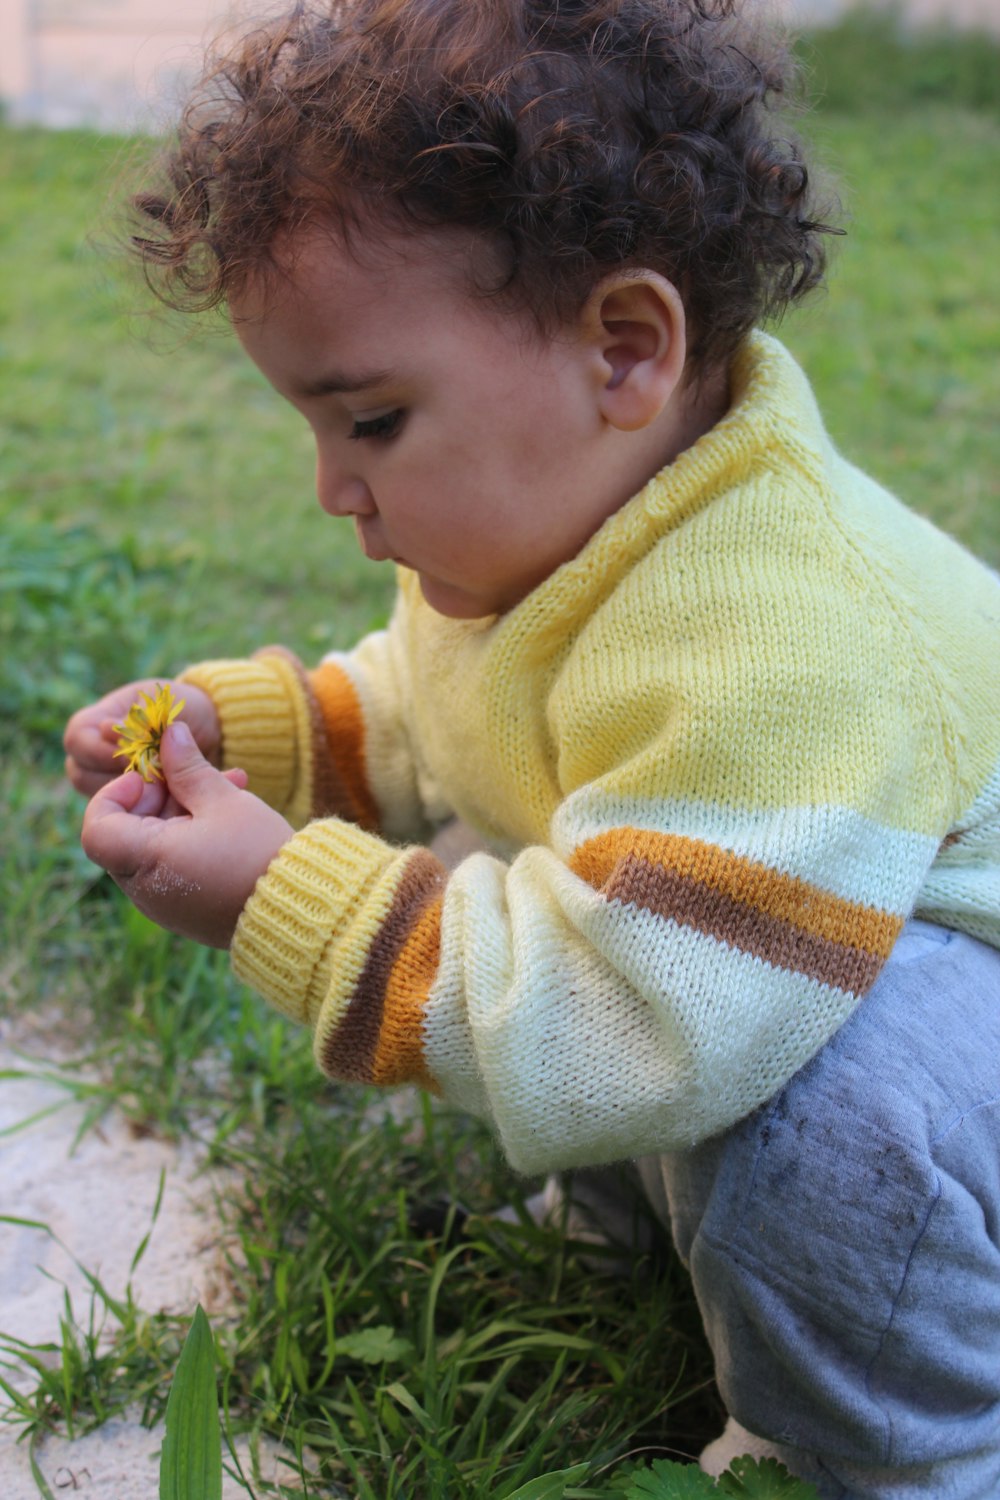 a small child is playing with a flower